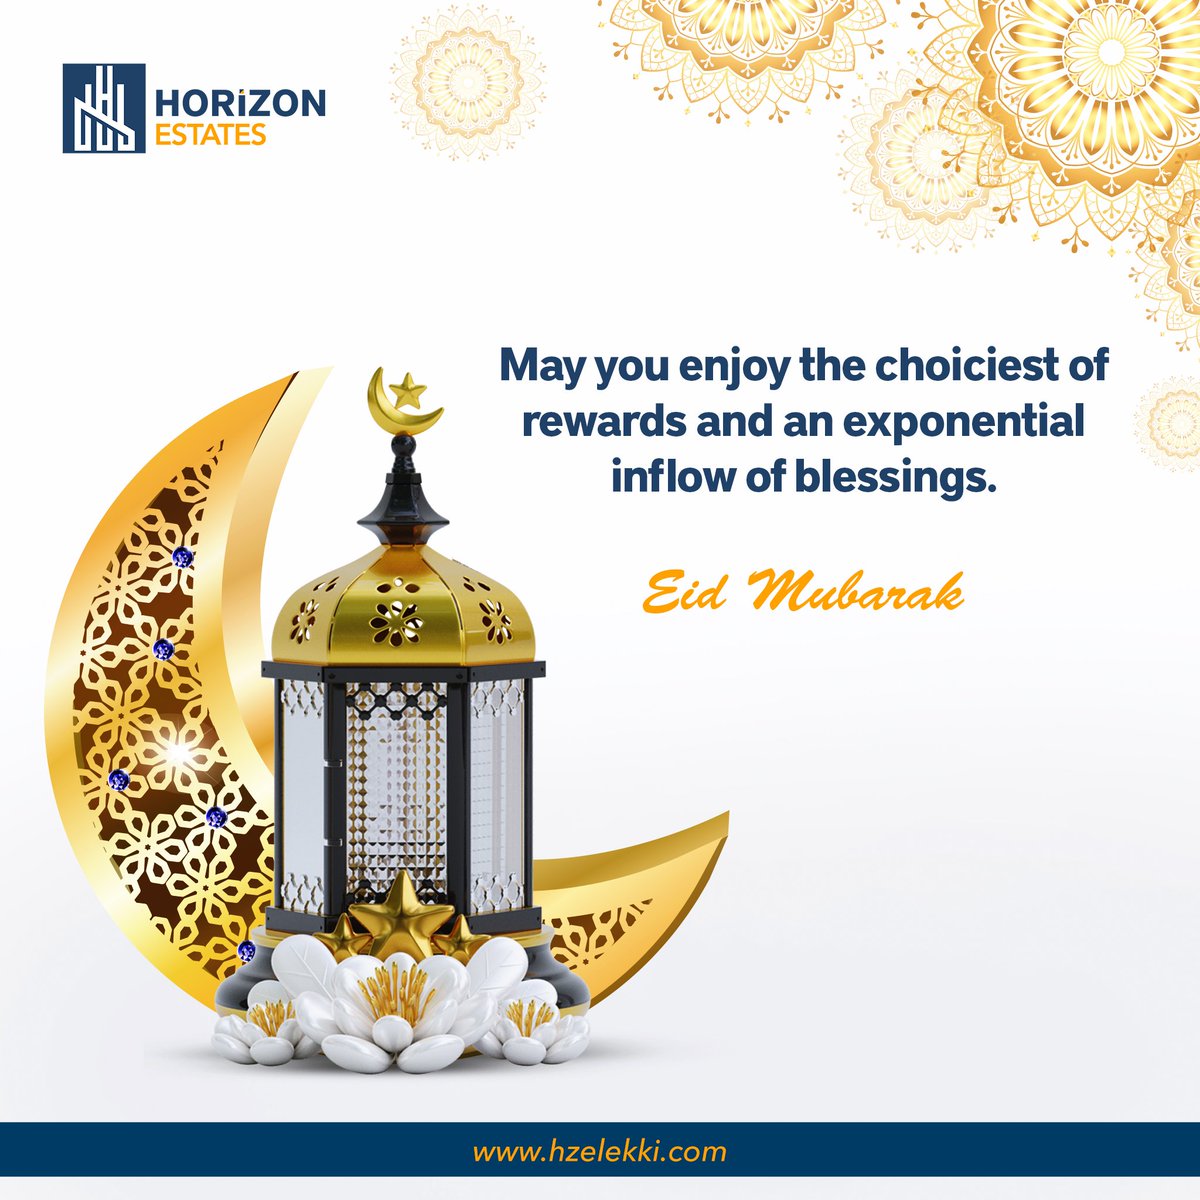 We hope there’s an unrestricted inflow of blessings, happiness, and all-round growth for you and yours. 

Happy Eid El-Fitr!

#HorizonEstates #HappyEidElFitr #LekkiHouses #LagosRealEstate #AffordableHomesInLekki #RealEstateInvestment #HomeInNigeria #BuyHouseInLagos #RealEstate